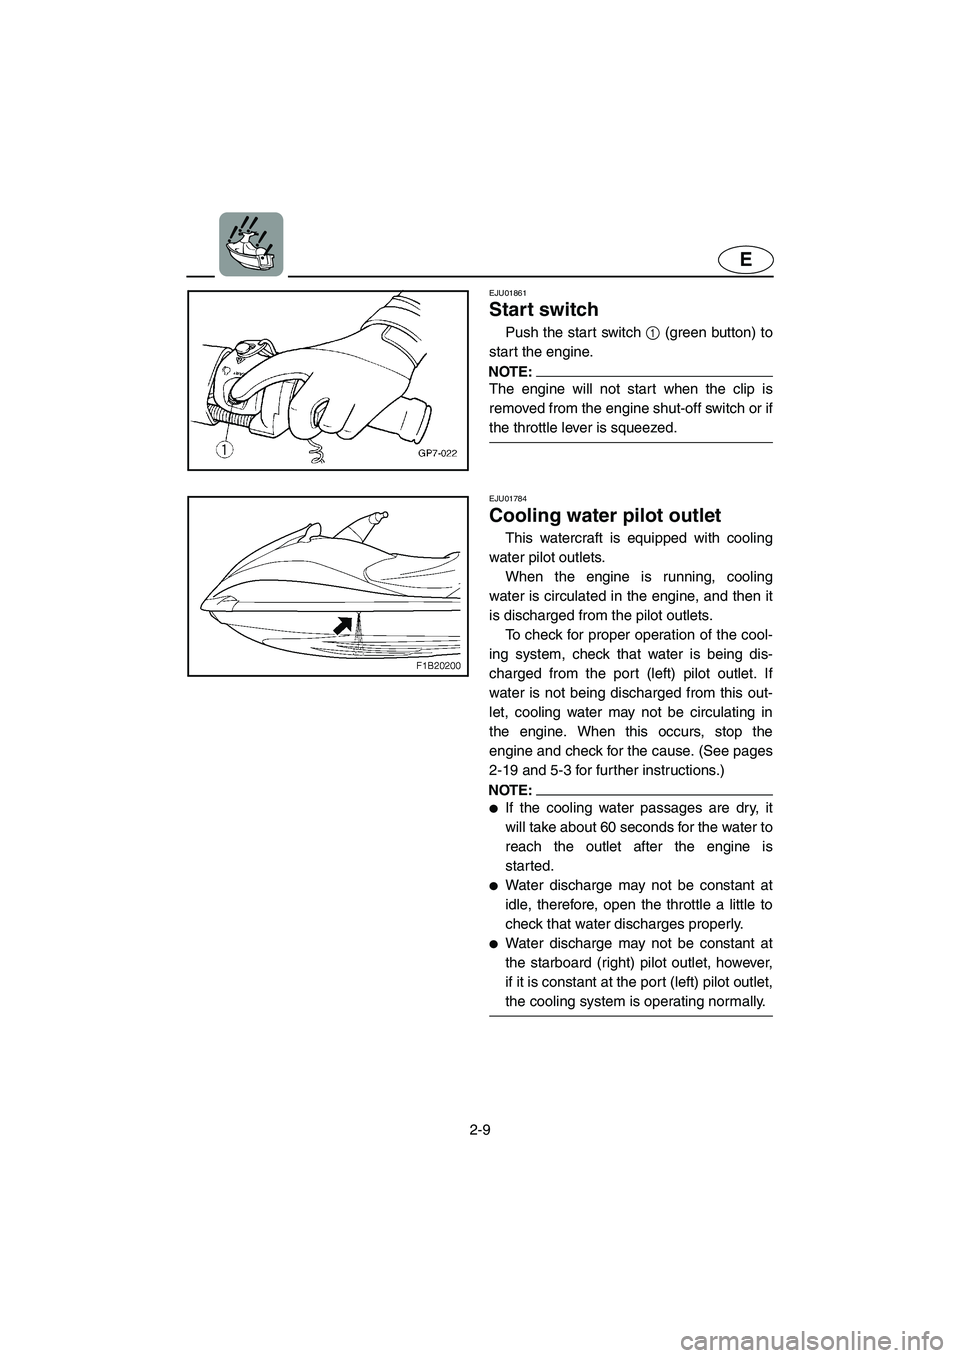 YAMAHA FX 2003  Owners Manual 2-9
E
EJU01861
Start switch 
Push the start switch 1 (green button) to
start the engine.
NOTE:@ The engine will not start when the clip is
removed from the engine shut-off switch or if
the throttle le